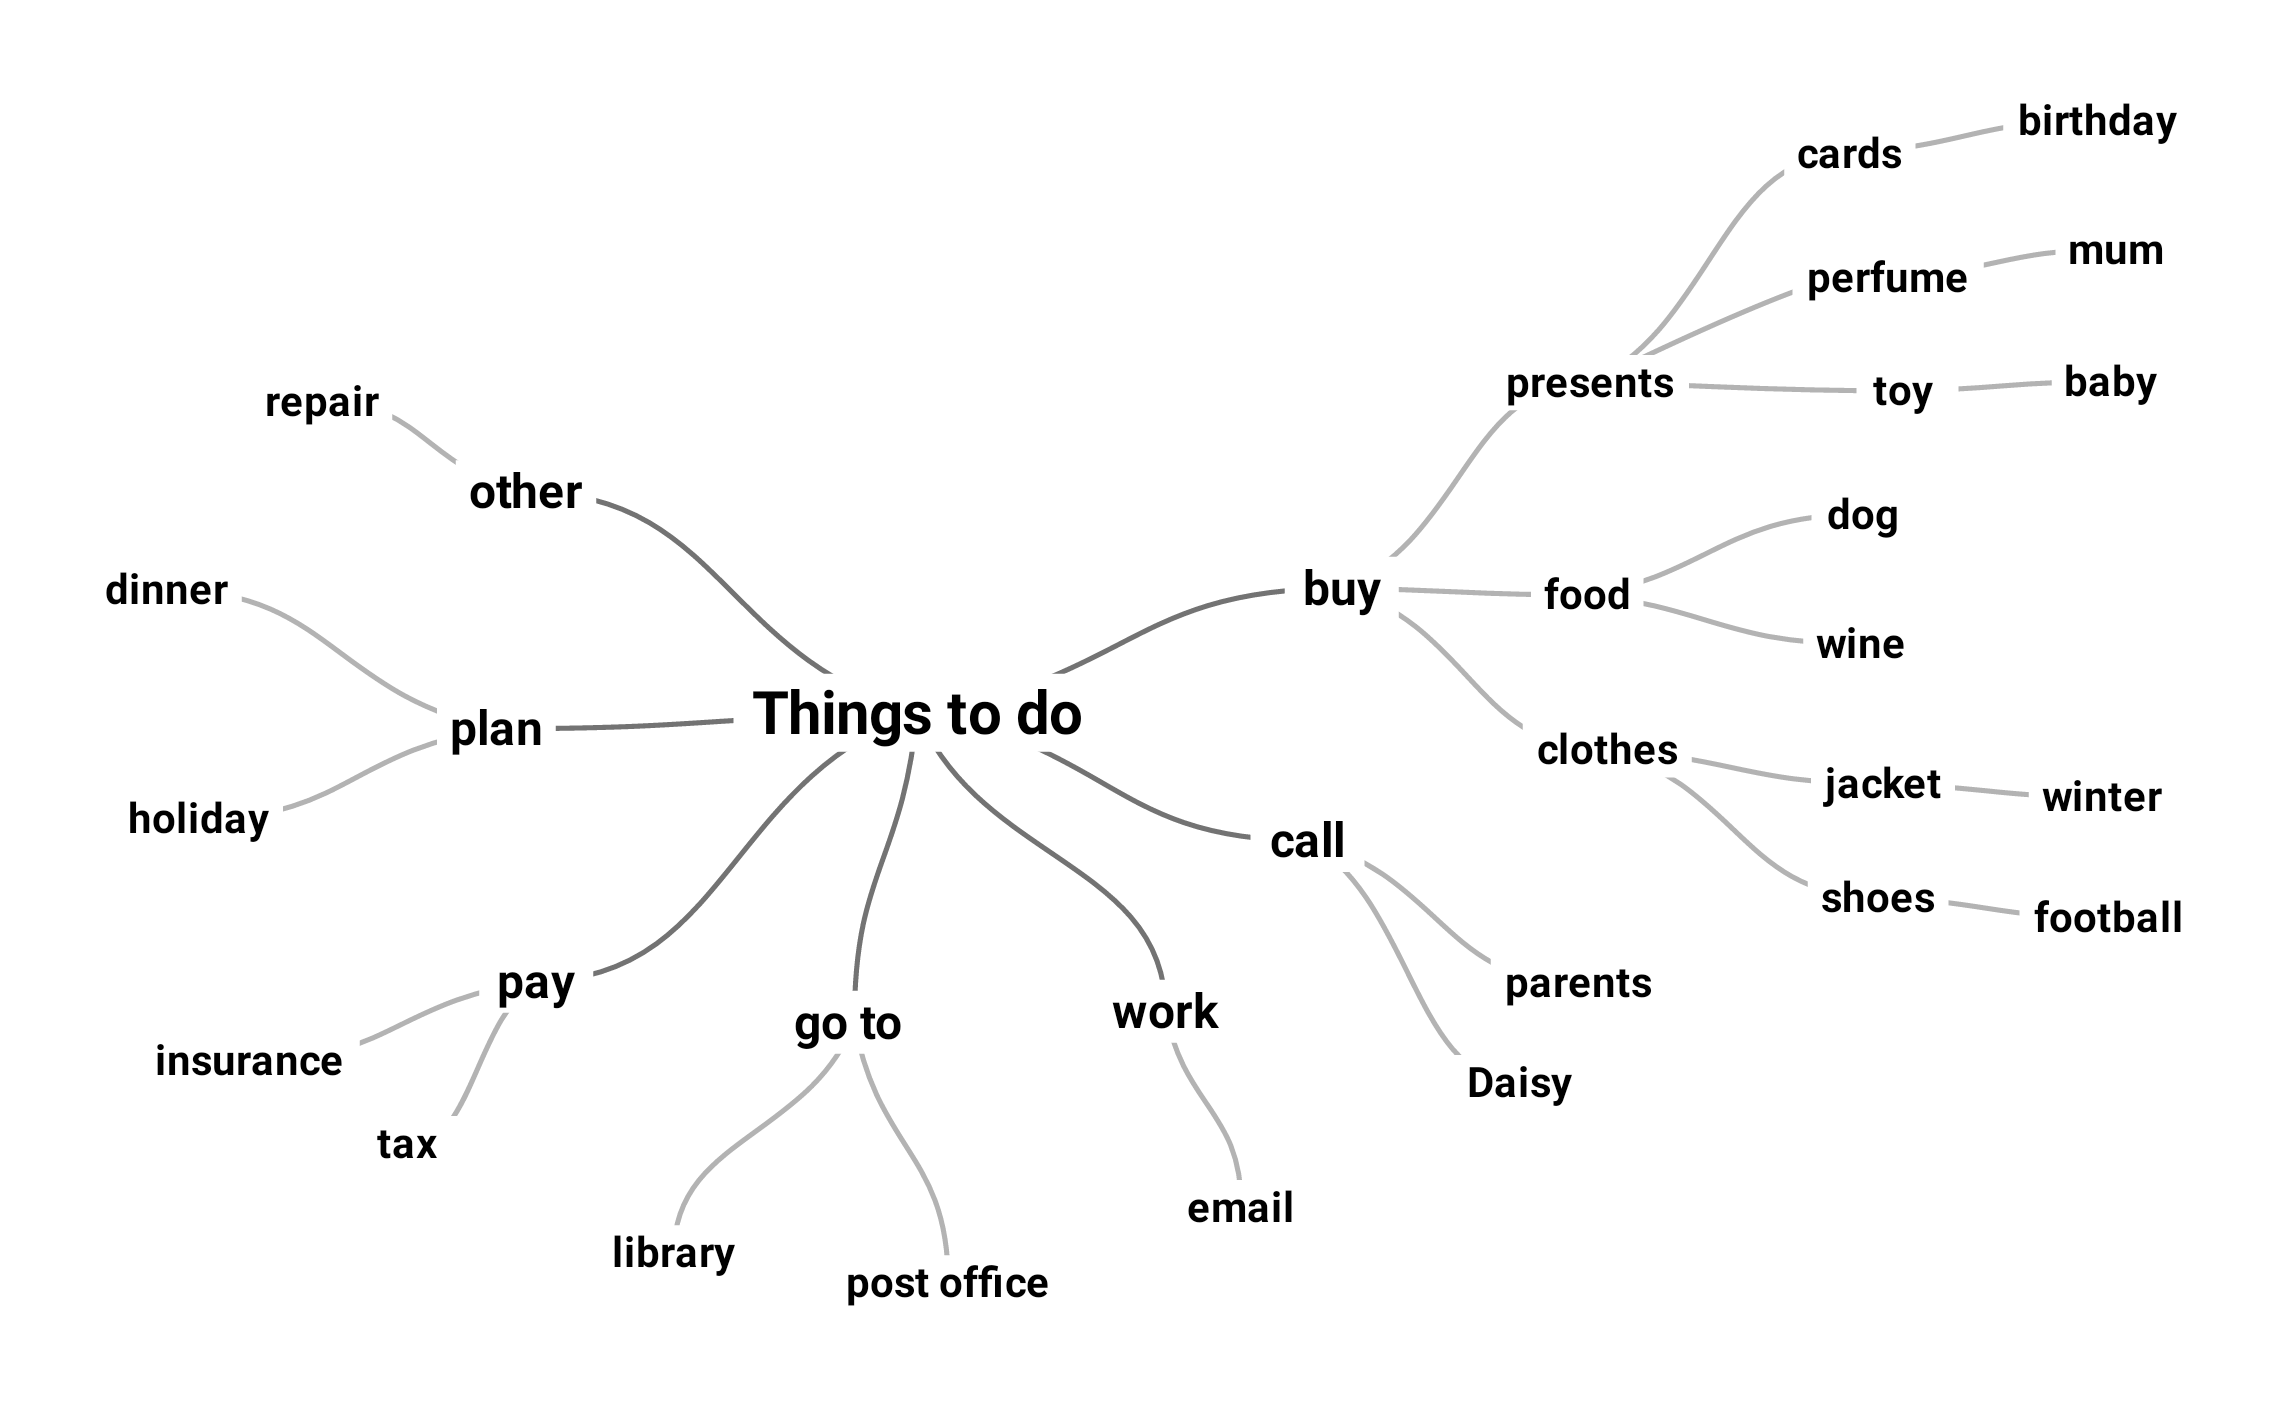 Associations are connected to "call", "work","go to","pay","plan" and"other"